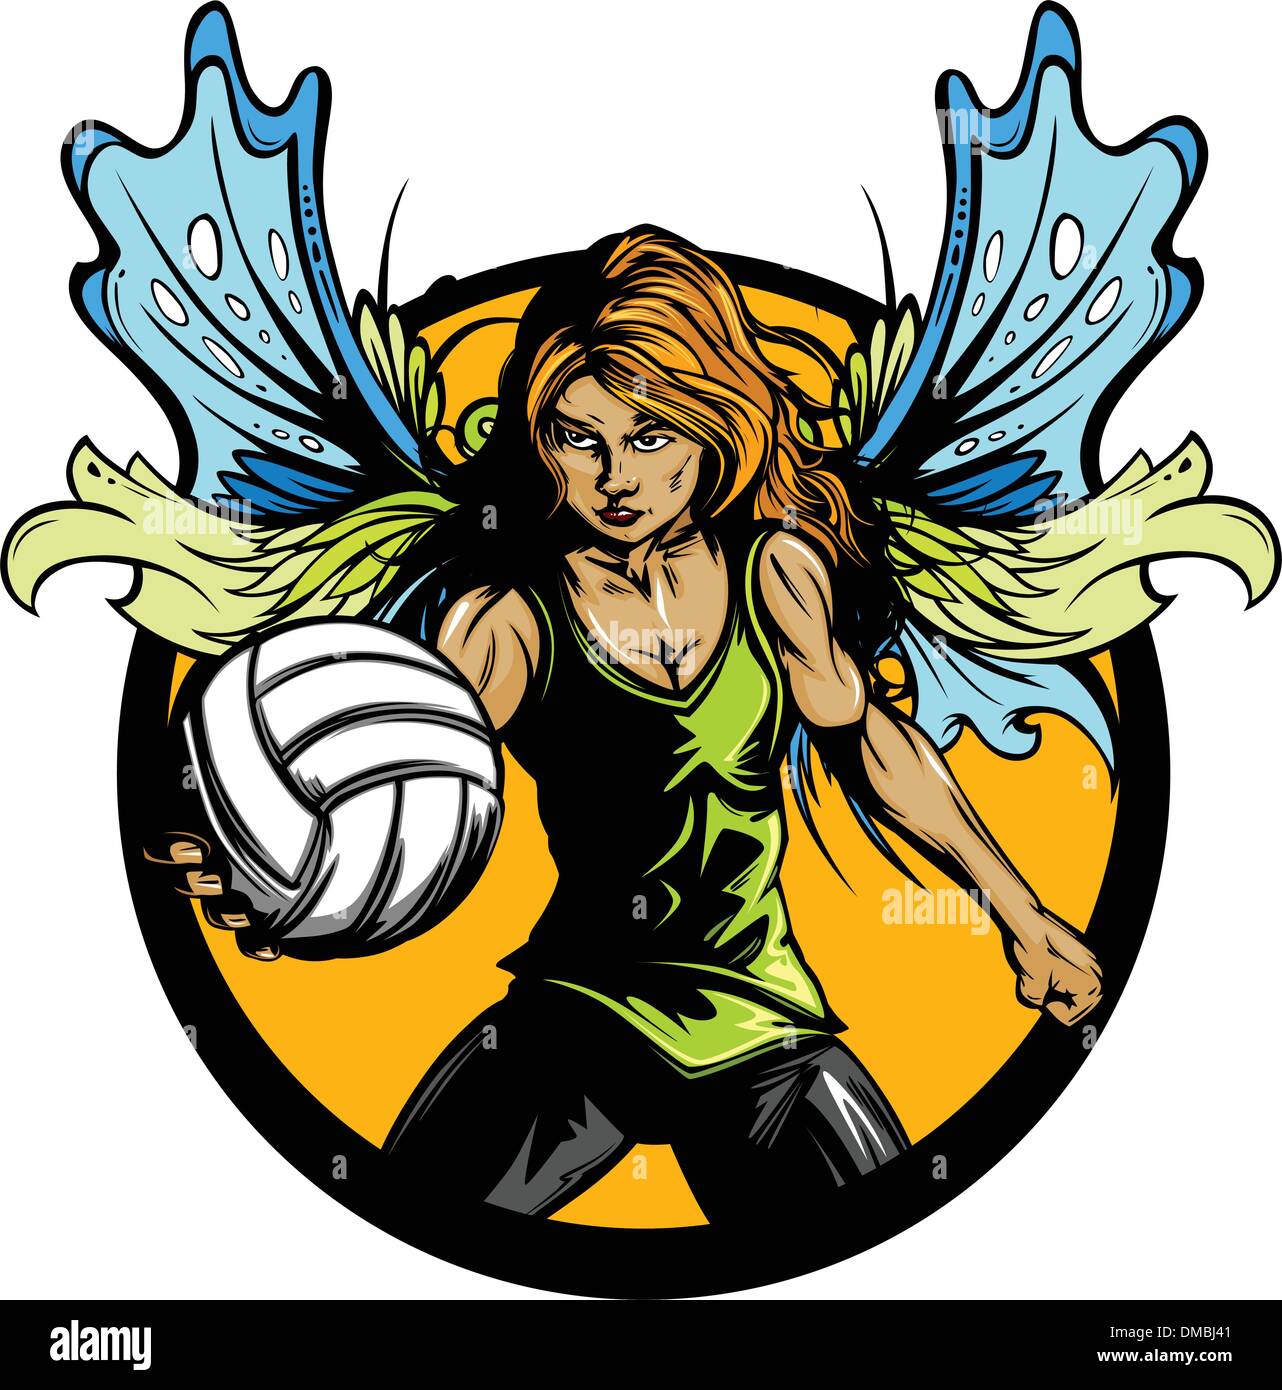 Female Volleyball Player with Fairy Wings Holding Ball Stock Vector